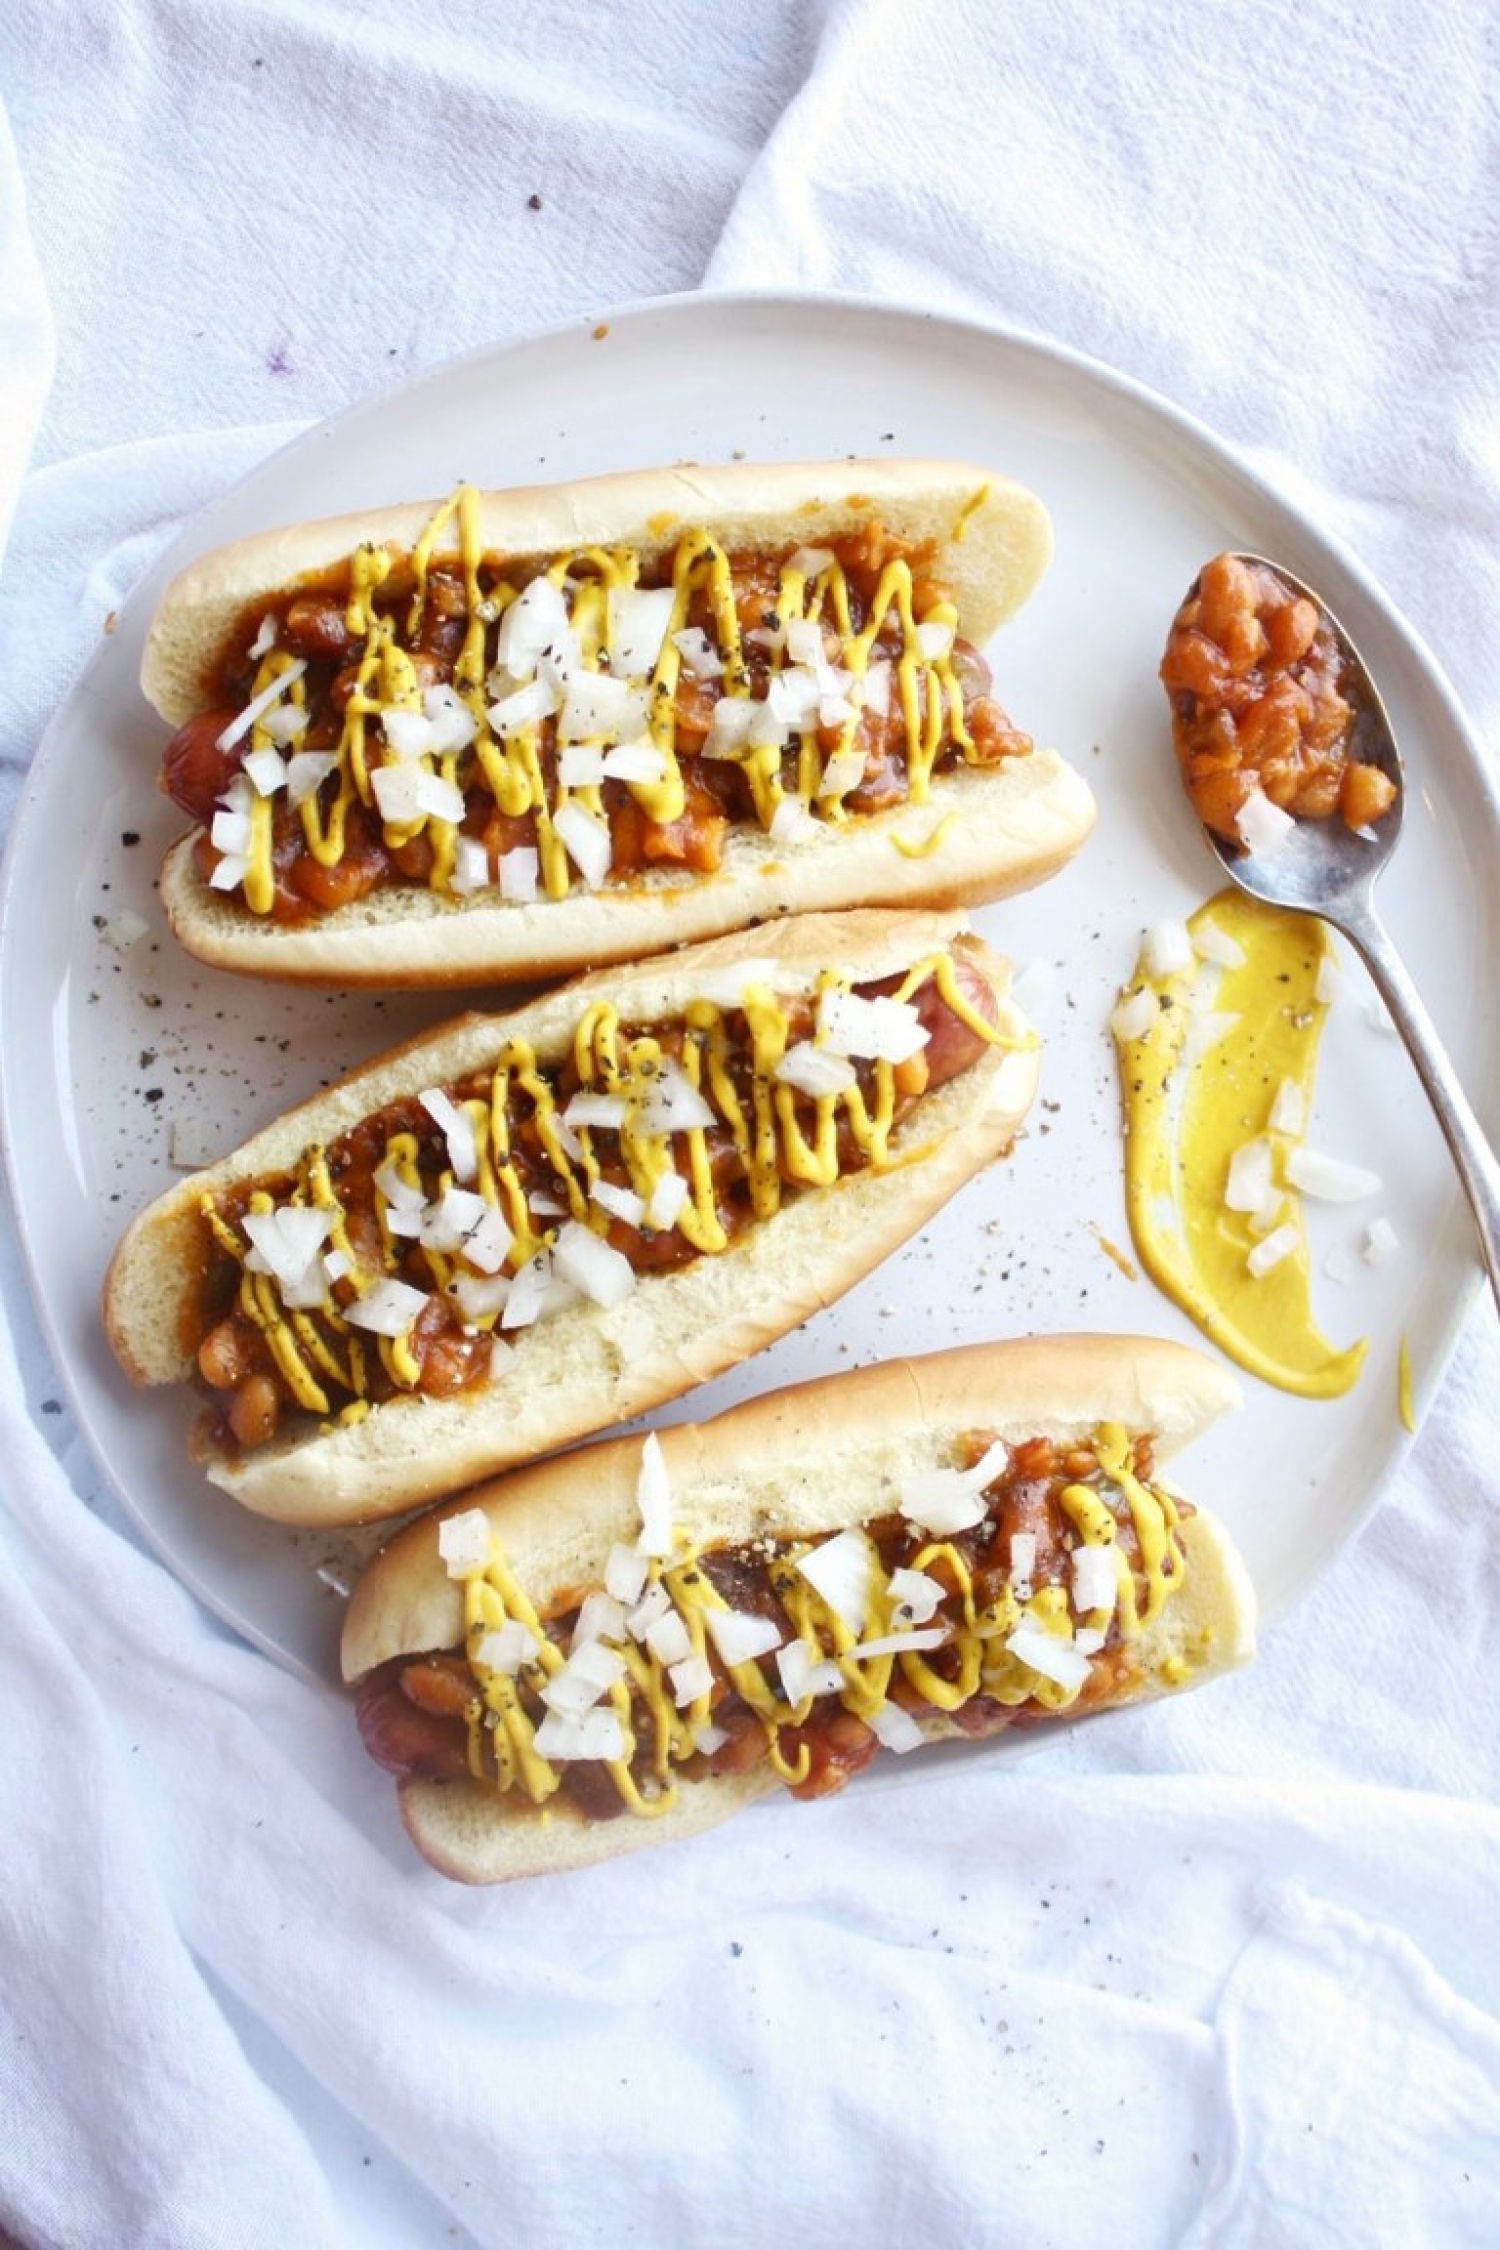 <p>Savory baked beans make for an absolutely delicious hot dog topping, paired with a simple combo of diced onion and mustard. Whether you make the beans from scratch or prefer the canned variety, it's the kind of meal you need in your weeknight dinner rotation. <a href="https://www.thegarlicdiaries.com/baked-bean-and-onion-dogs/" rel="nofollow noopener">Get the recipe here.</a></p>